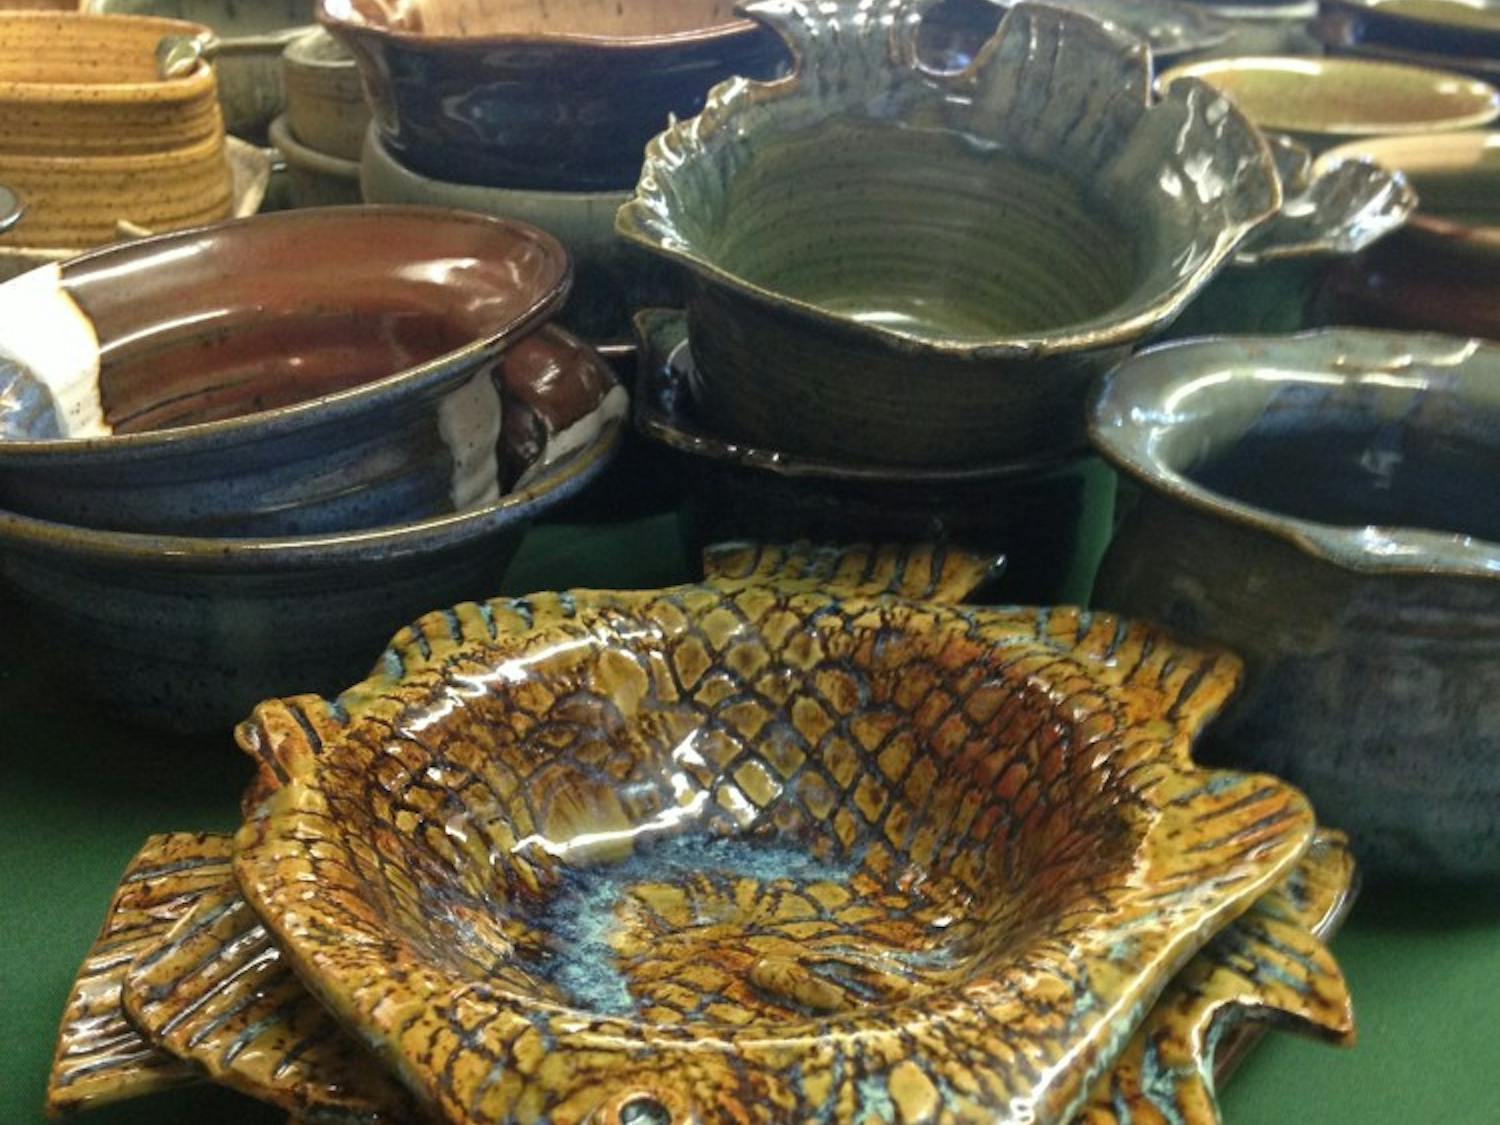 Bowls sit on display ready for the pre-sale.